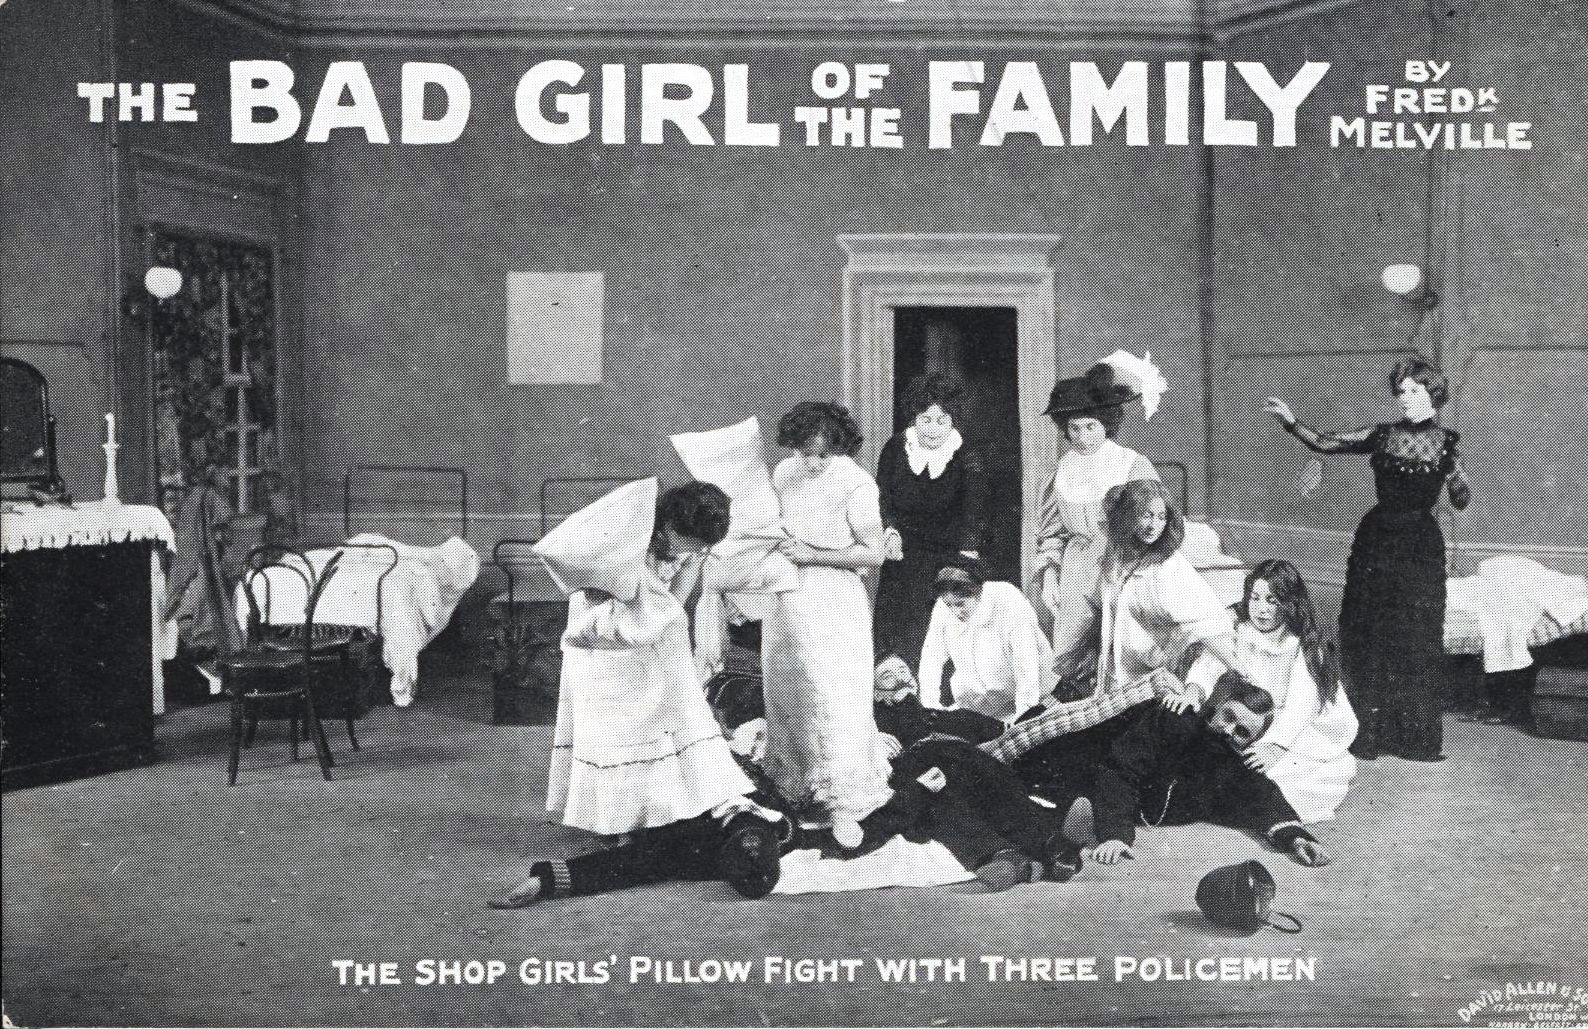 Black and white postcard photograph publicising 'The Bad Girl of the Family' by Frederick Melville, and showing a scene from the play